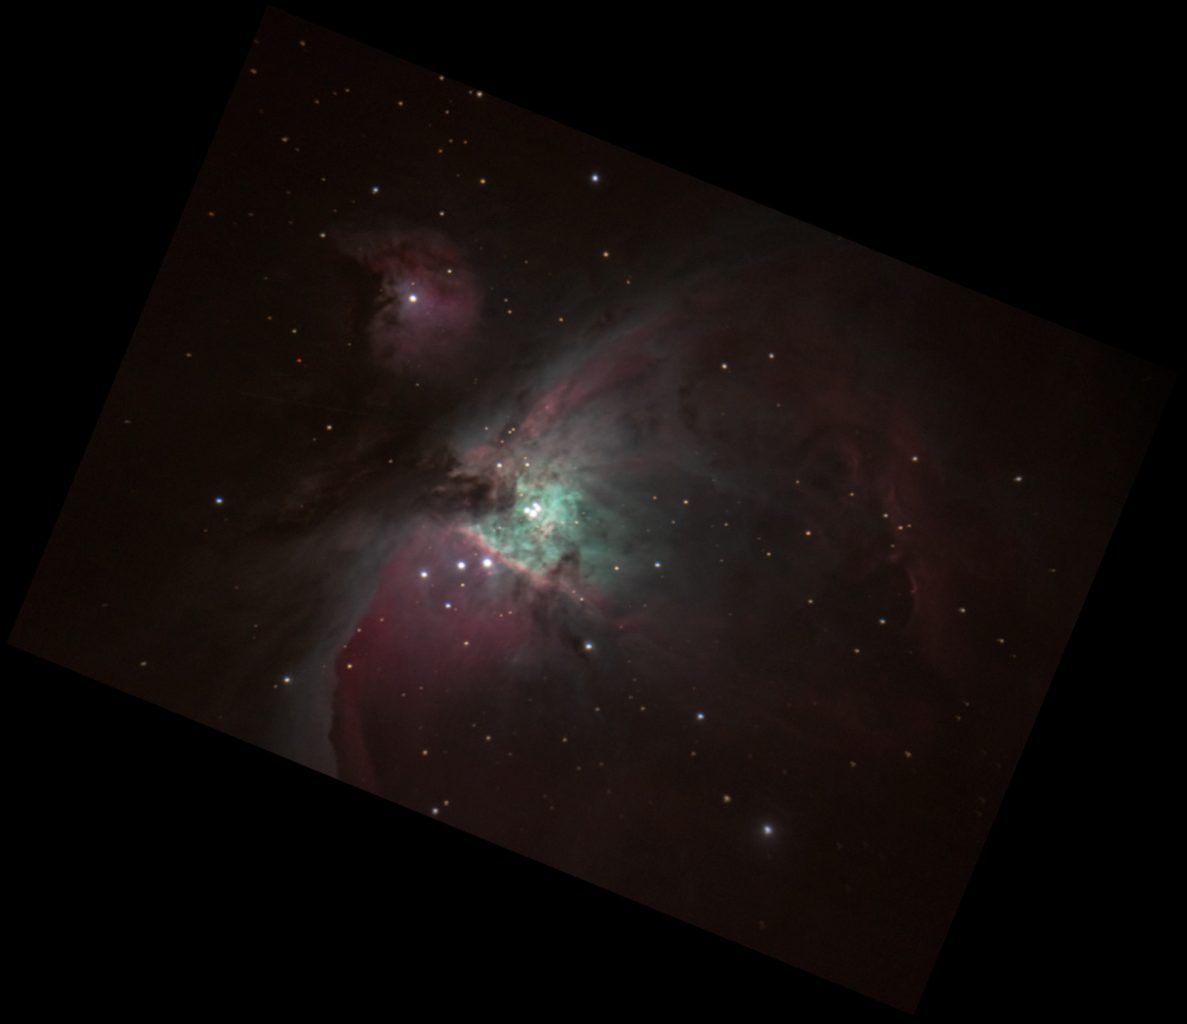 The central portion of M42, The Great Orion Nebula, showing the Trapezium. 8” Meade LX200R and Canon 750D, 6x30 second exposures at iso 1600. Credit: Ian Bradley